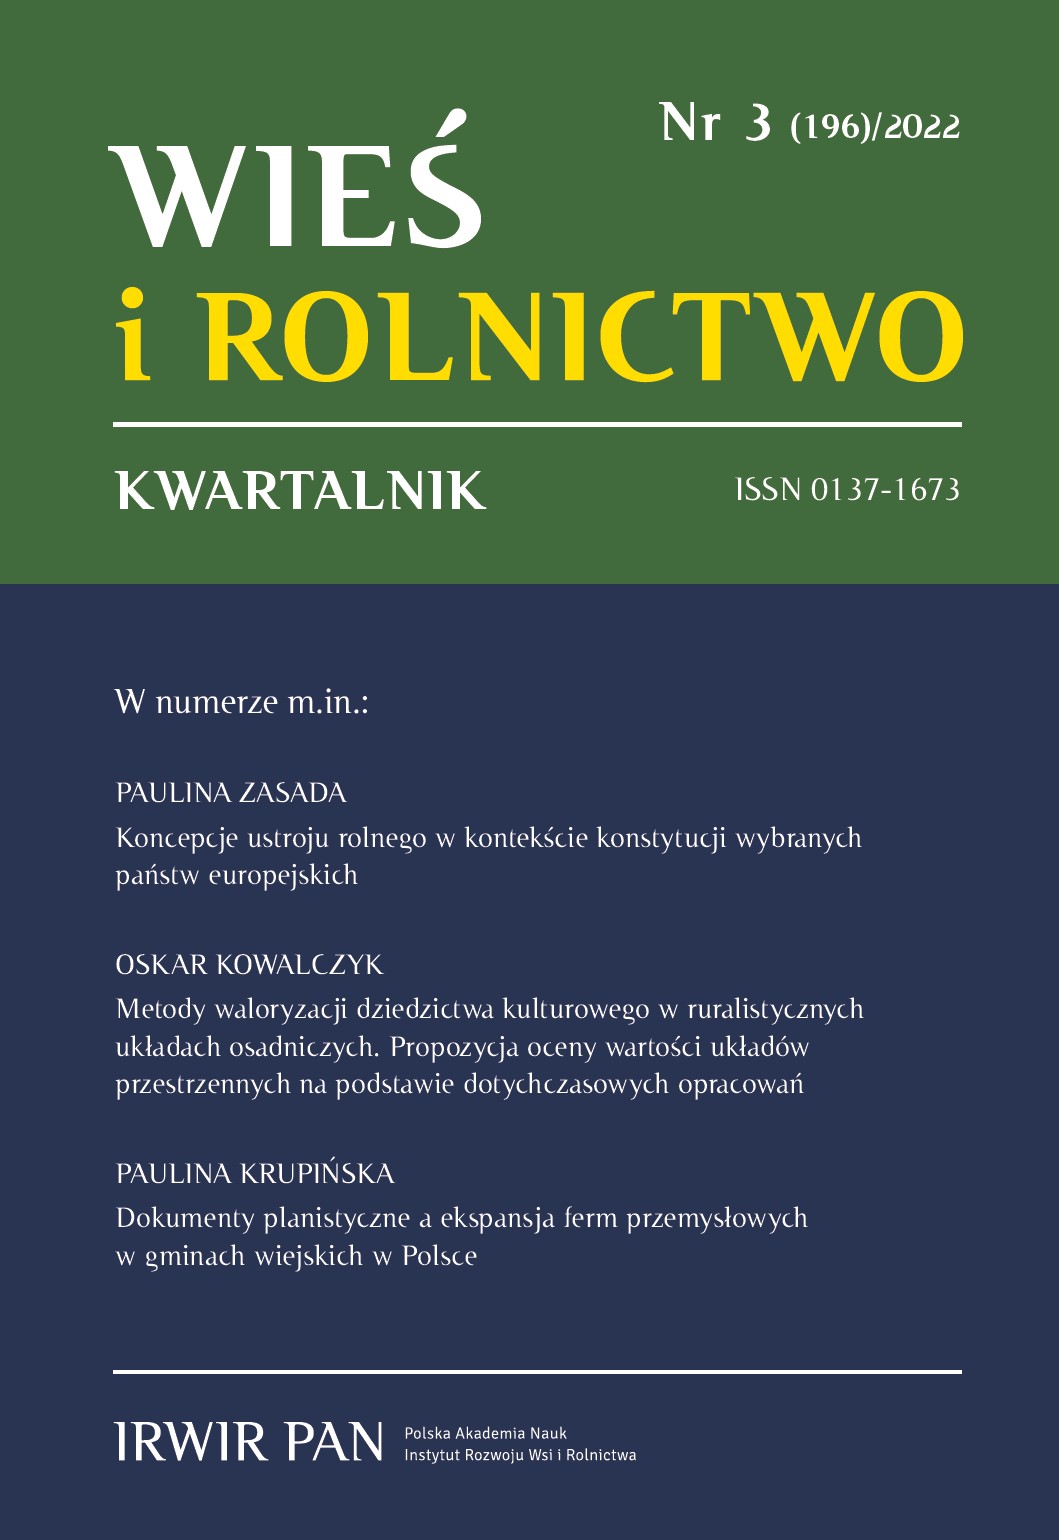 The Importance of Land Commons in Poland in Food Production:
Introduction to the Discussion Cover Image